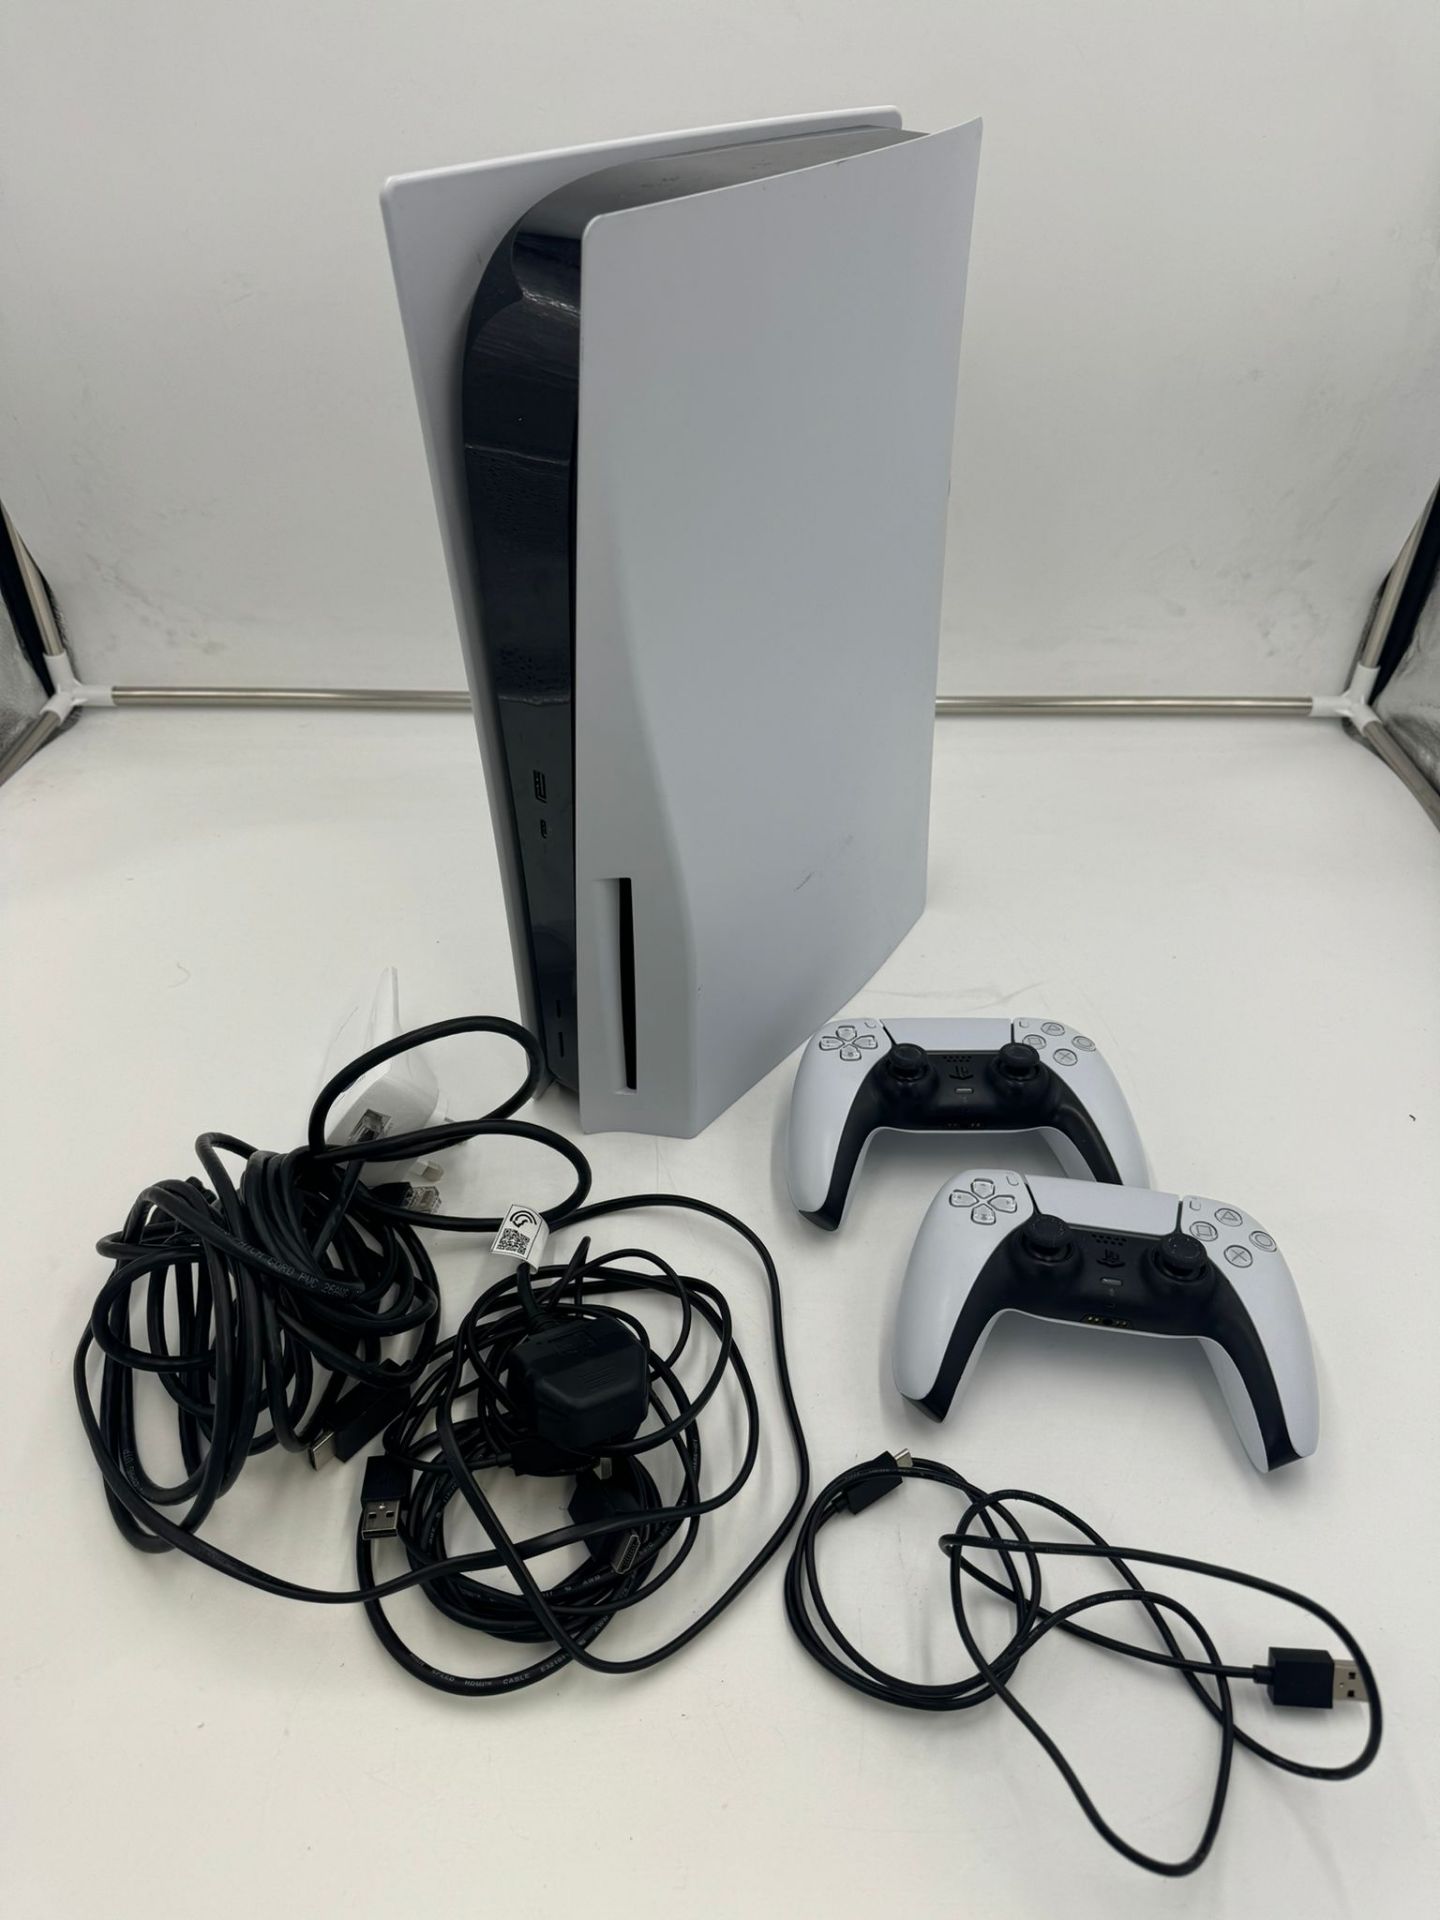 PLAY STATION 5 WITH POWER CABLES & X 2 CONTROLLERS - POWERS ON BUT WE HAVE NOT TESTED FULLY TESTED